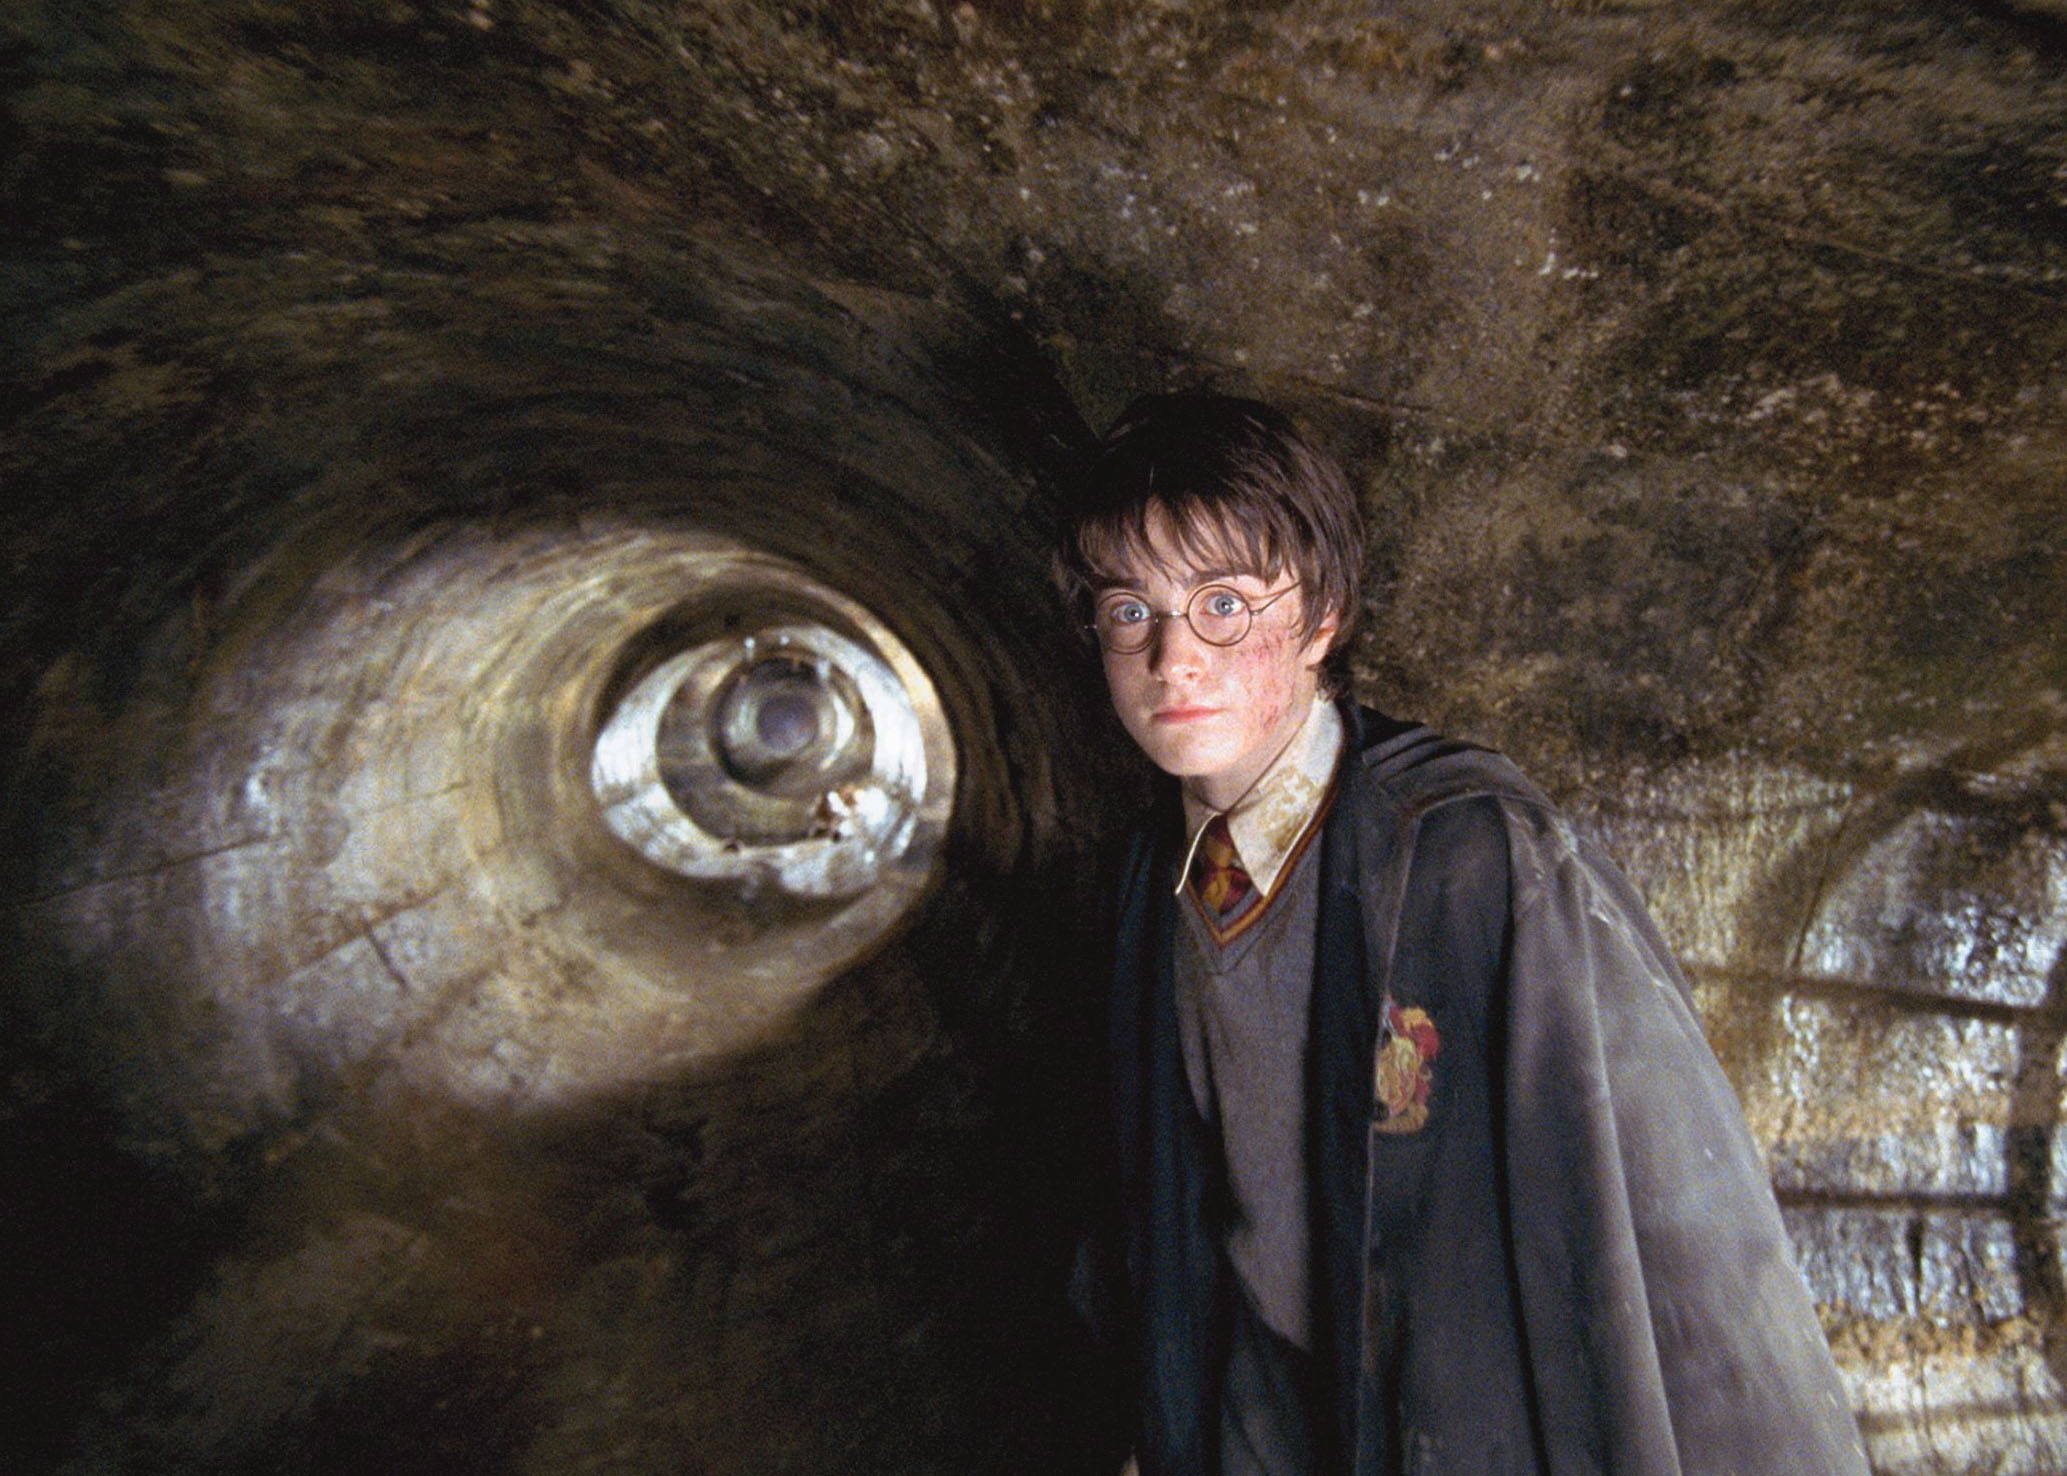 Quality: Original.

Film Title: Harry Potter And The Chamber Of Secrets. Caption: DANIEL RADCLIFFE as Harry Potter in a sce